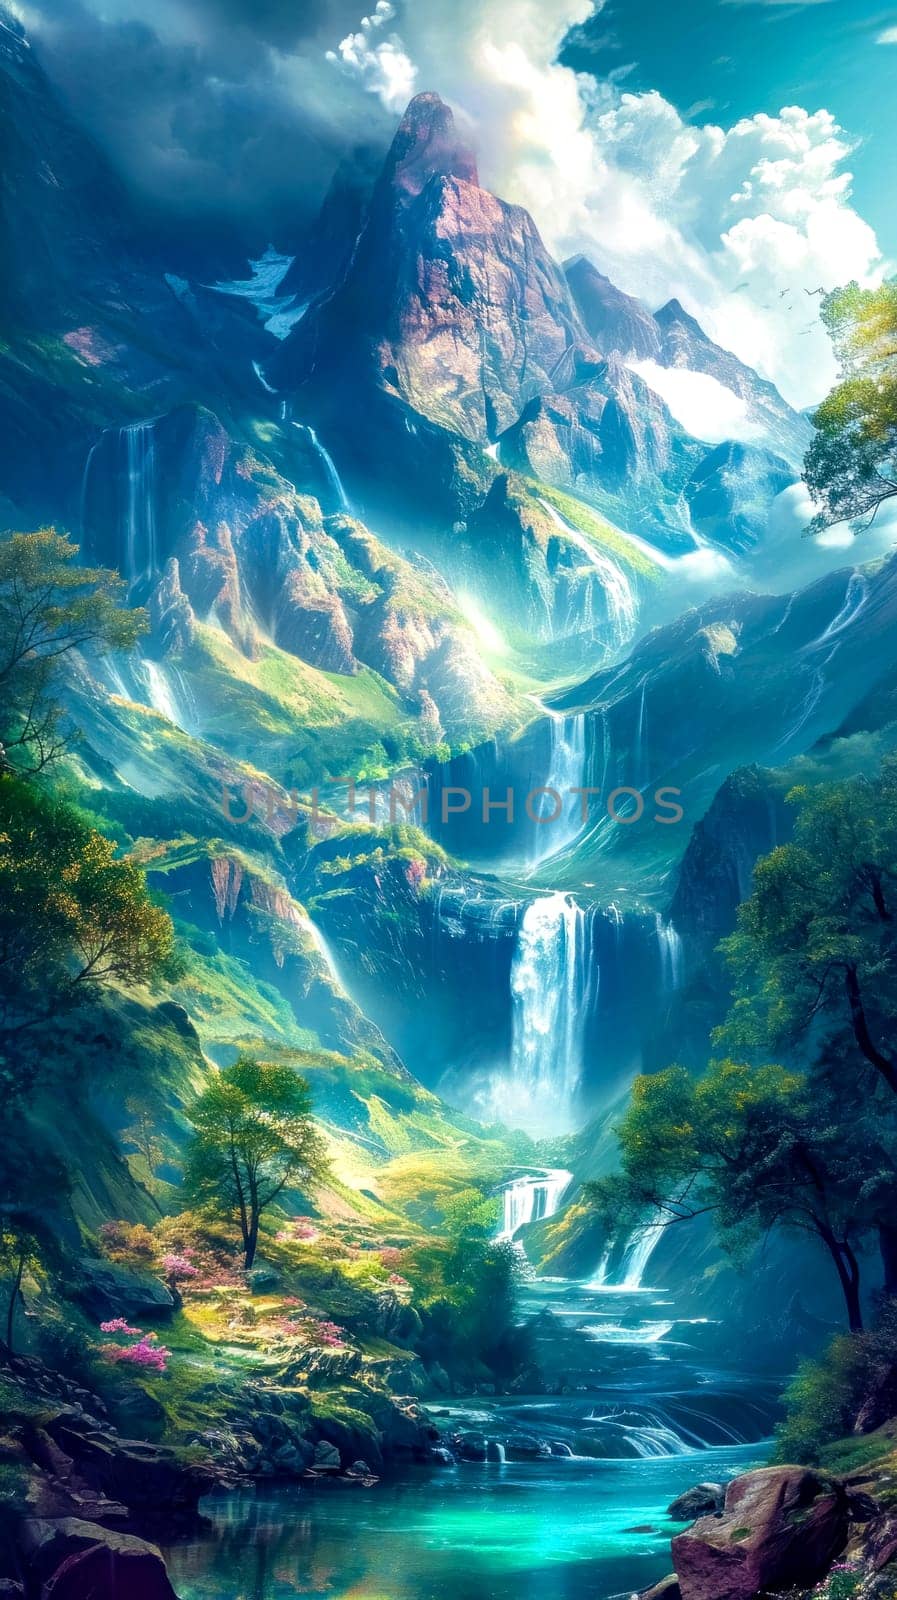 breathtaking fantasy landscape, showcasing a vibrant river with multiple waterfalls cascading down majestic mountains, surrounded by lush greenery and flowering trees, all under a serene sky, vertical